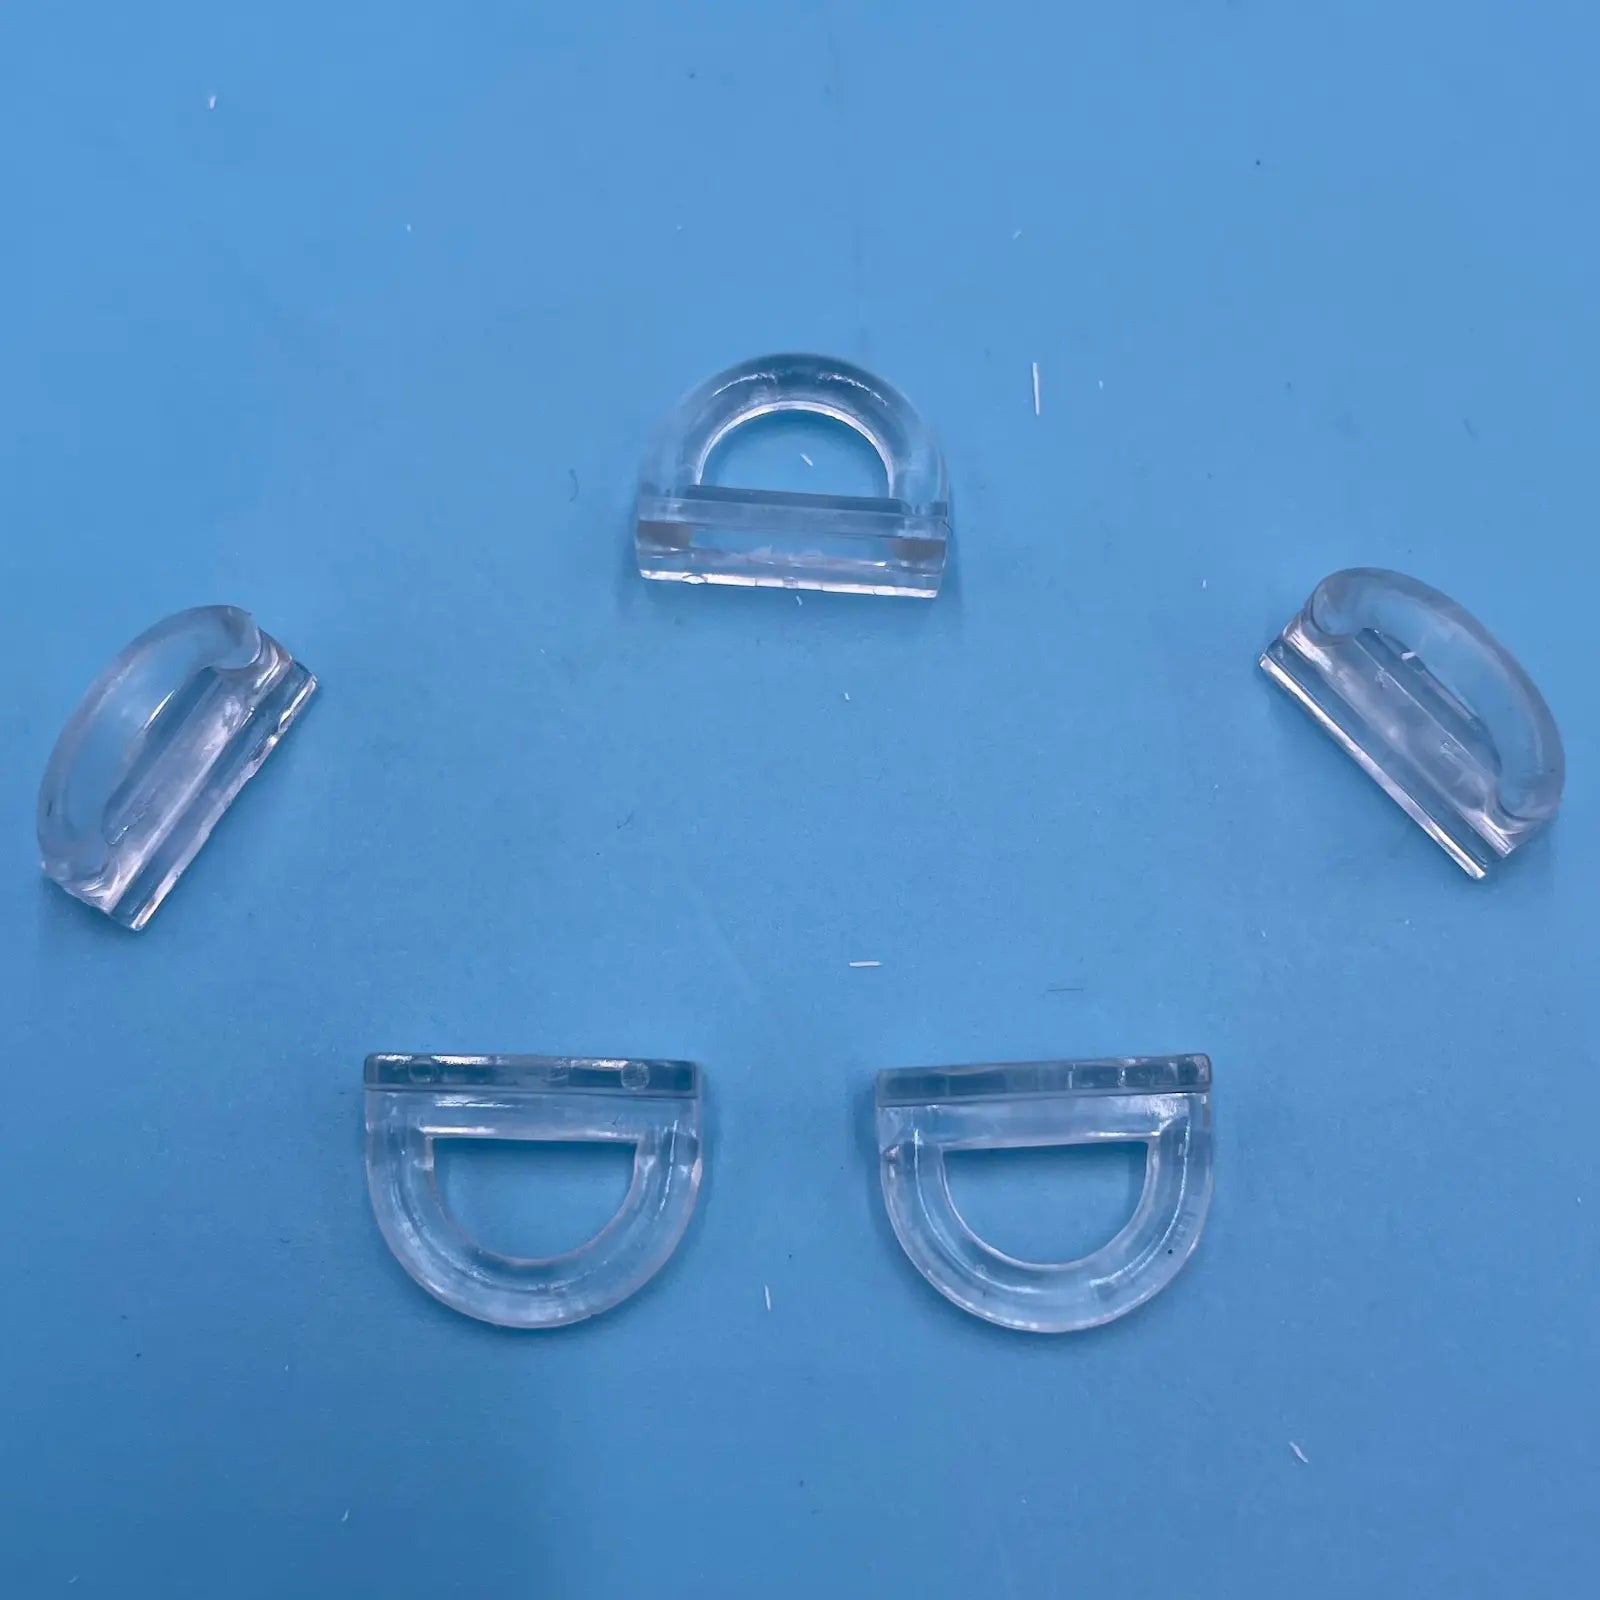 Rollease No Sew Cord Guides for Roman Shades